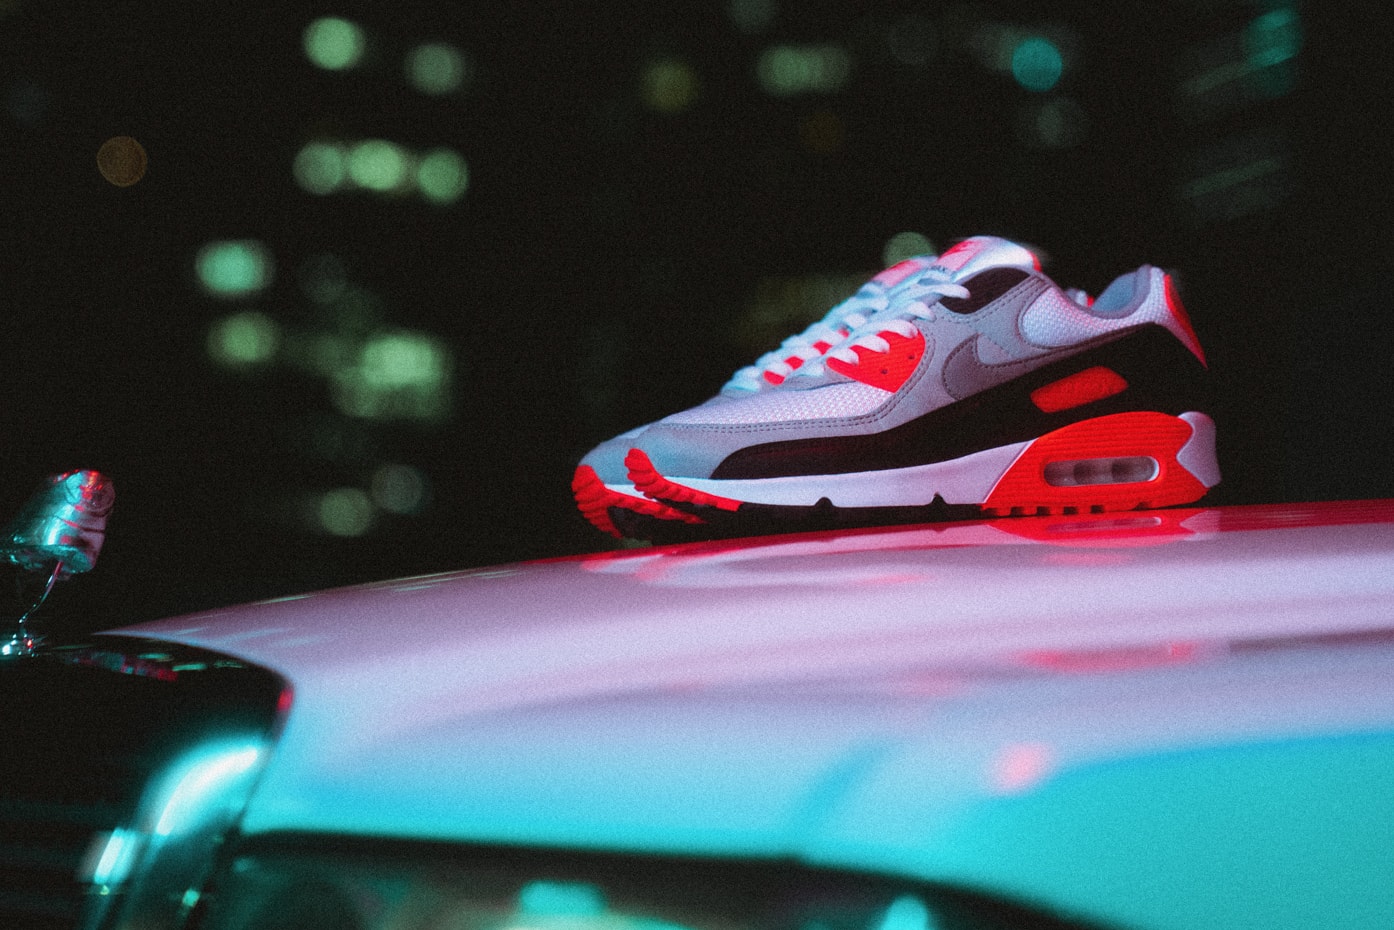 Nike Max 90 "Infrared"-Themed Mercedes-Benz 190E | Hypebeast